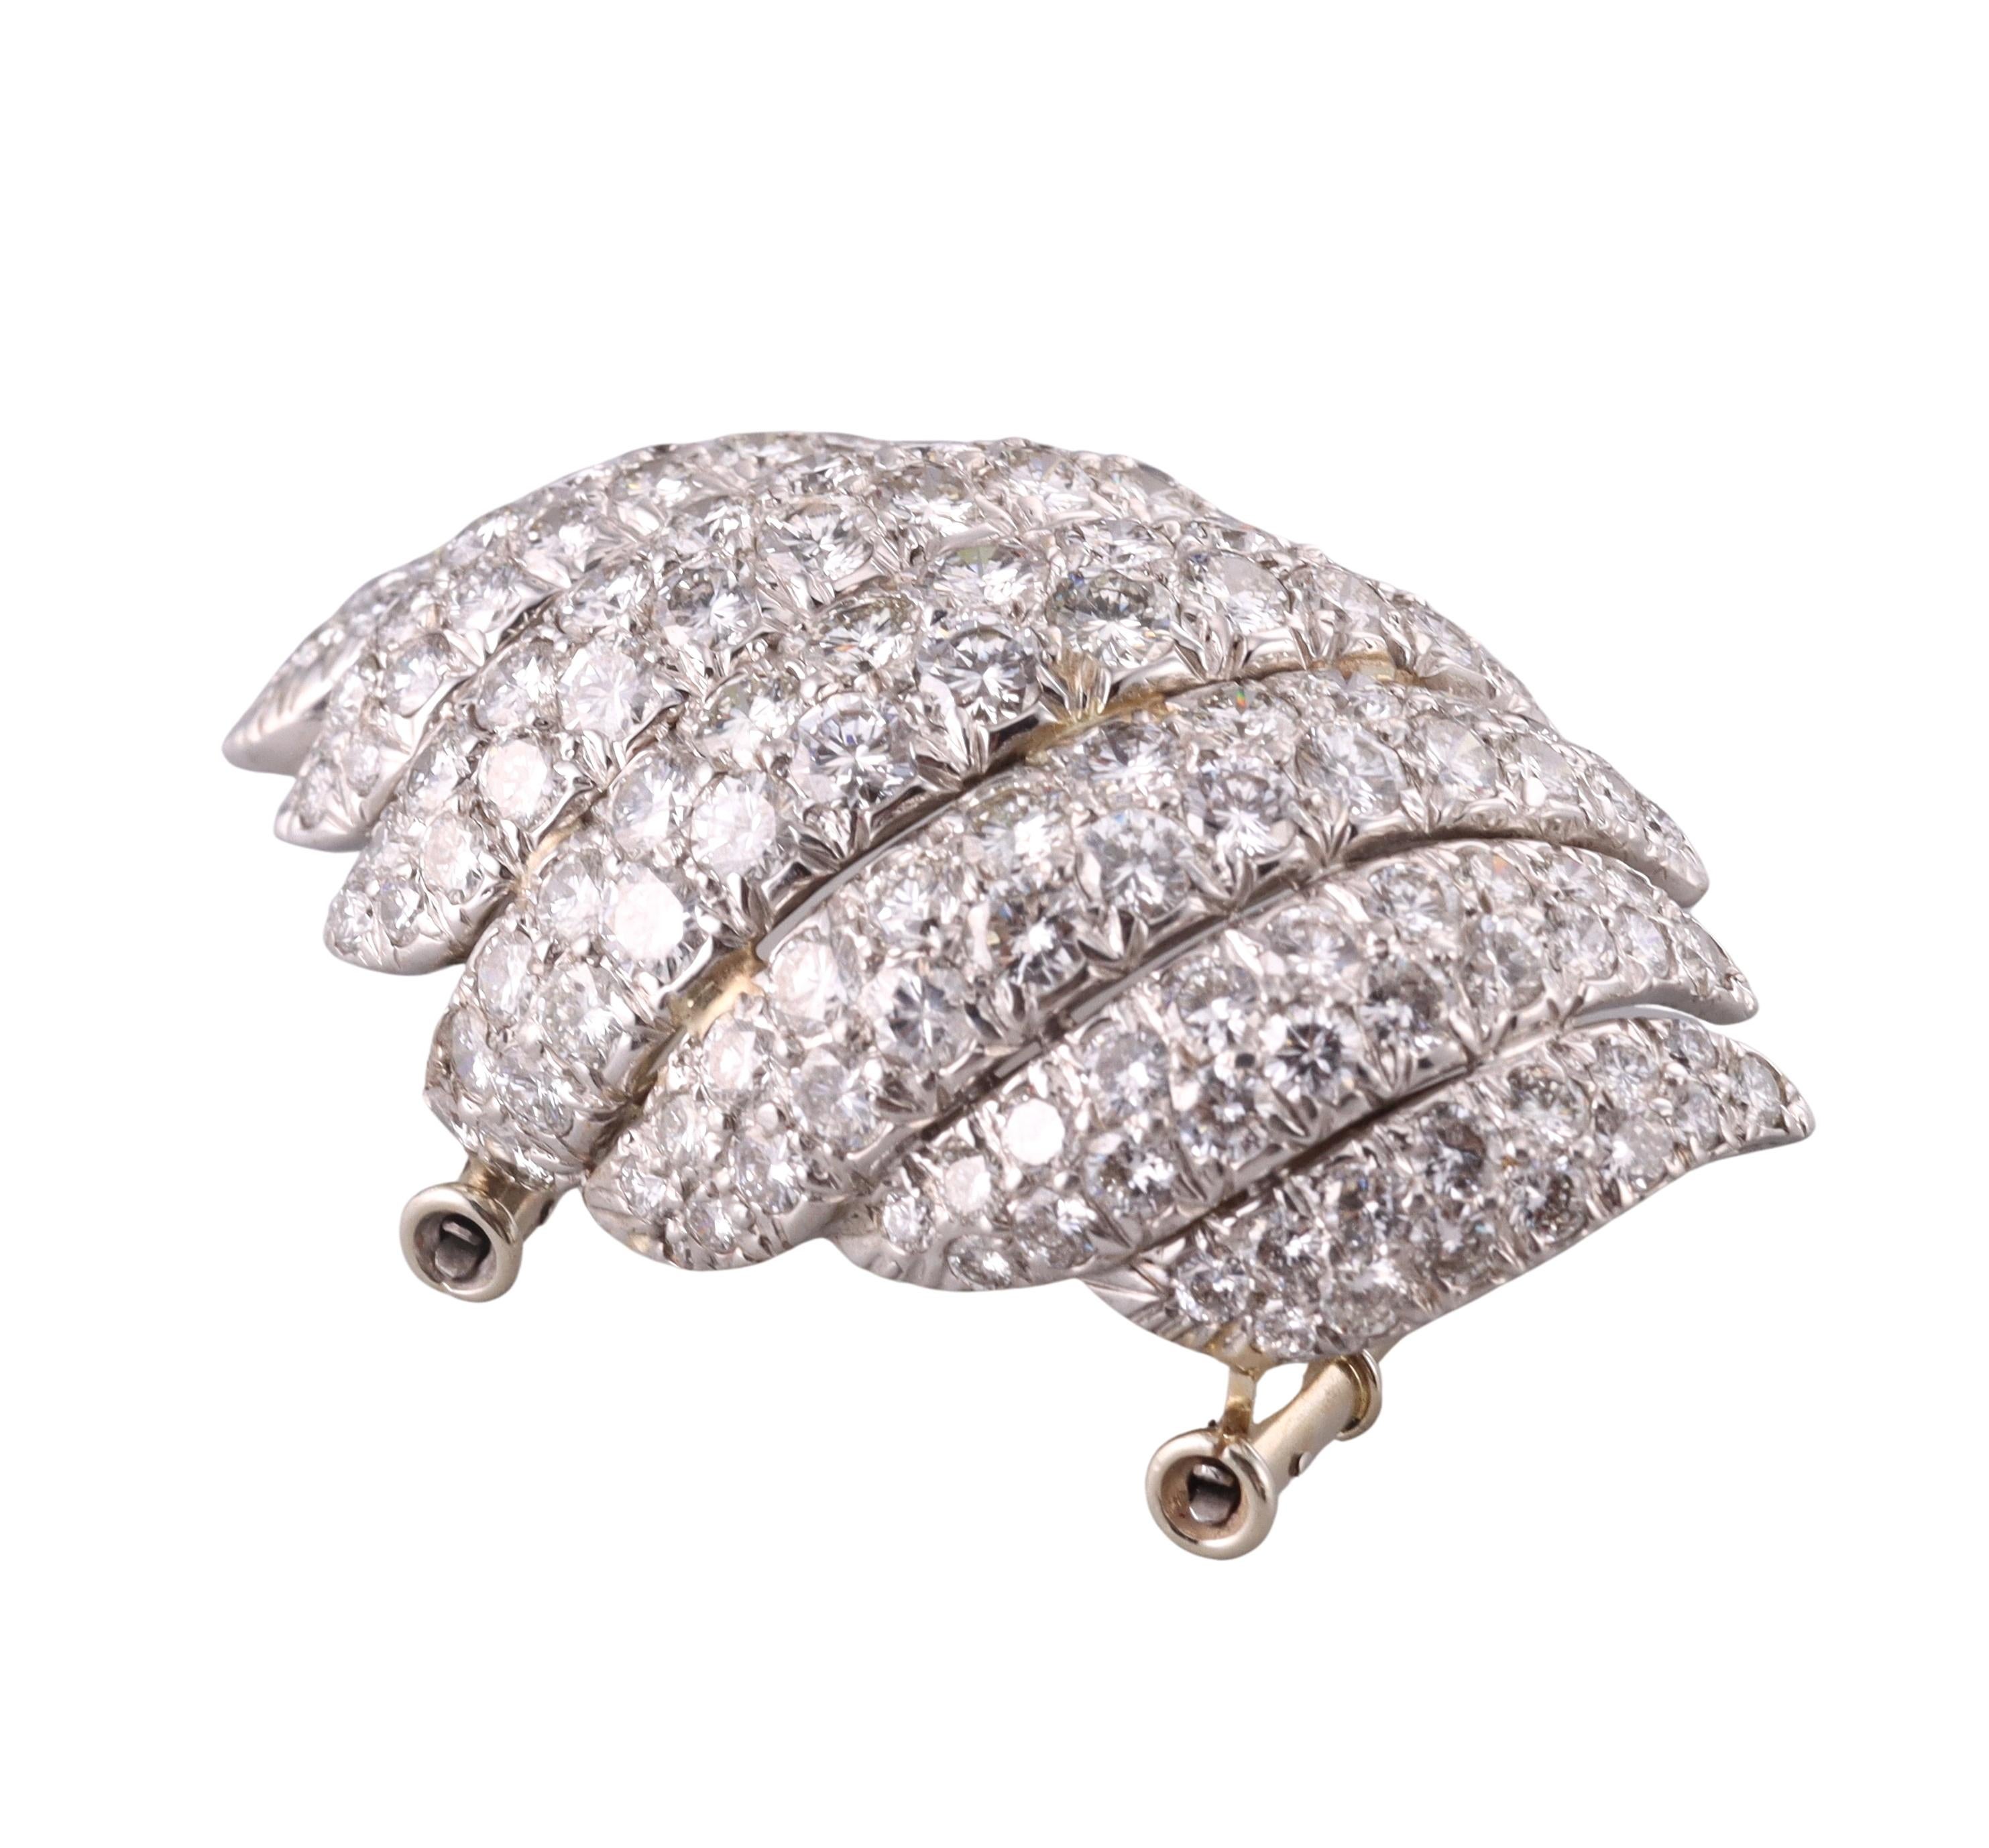 David Webb 10 Carat Diamond Platinum Brooch In Excellent Condition For Sale In New York, NY